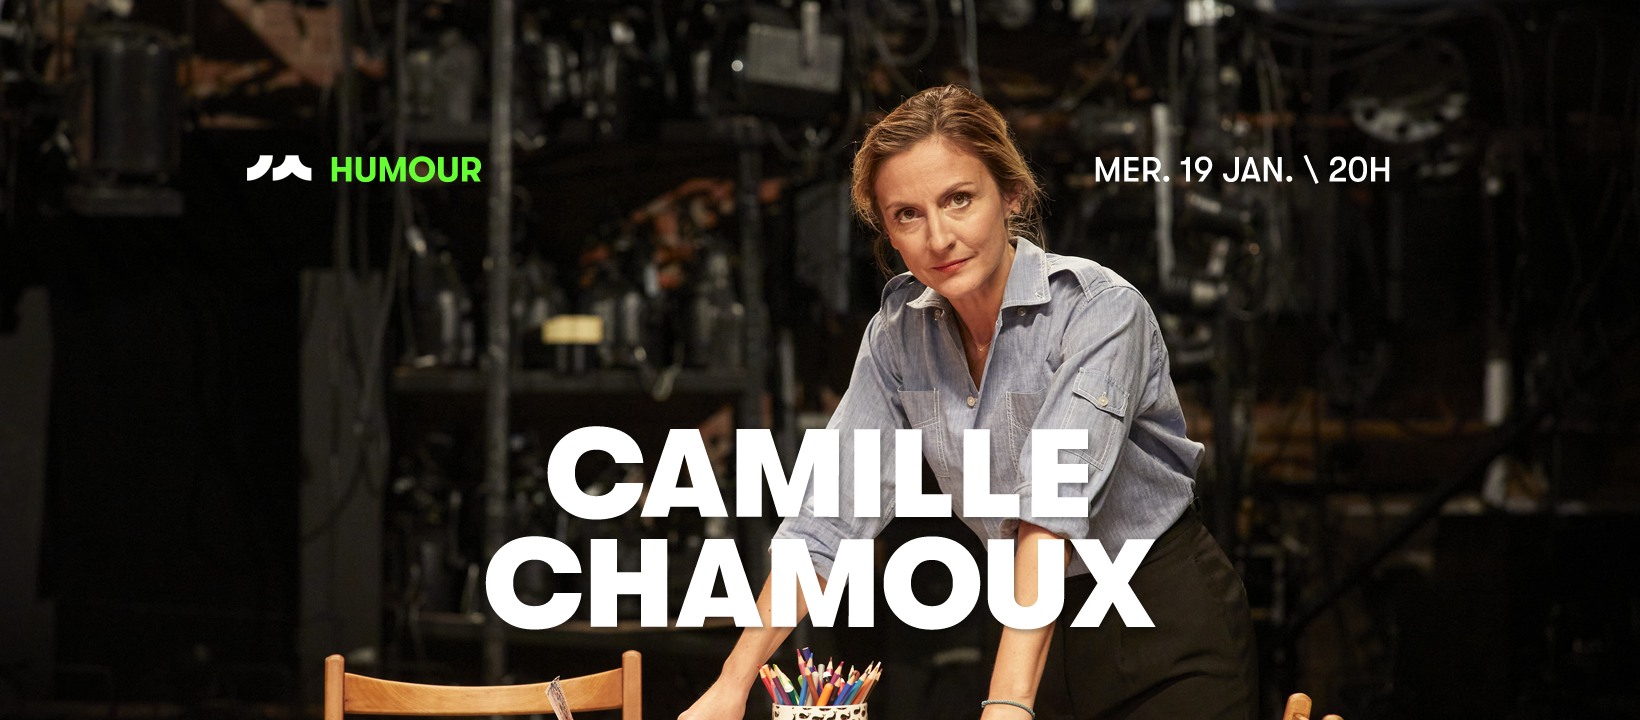 Camille Chamoux